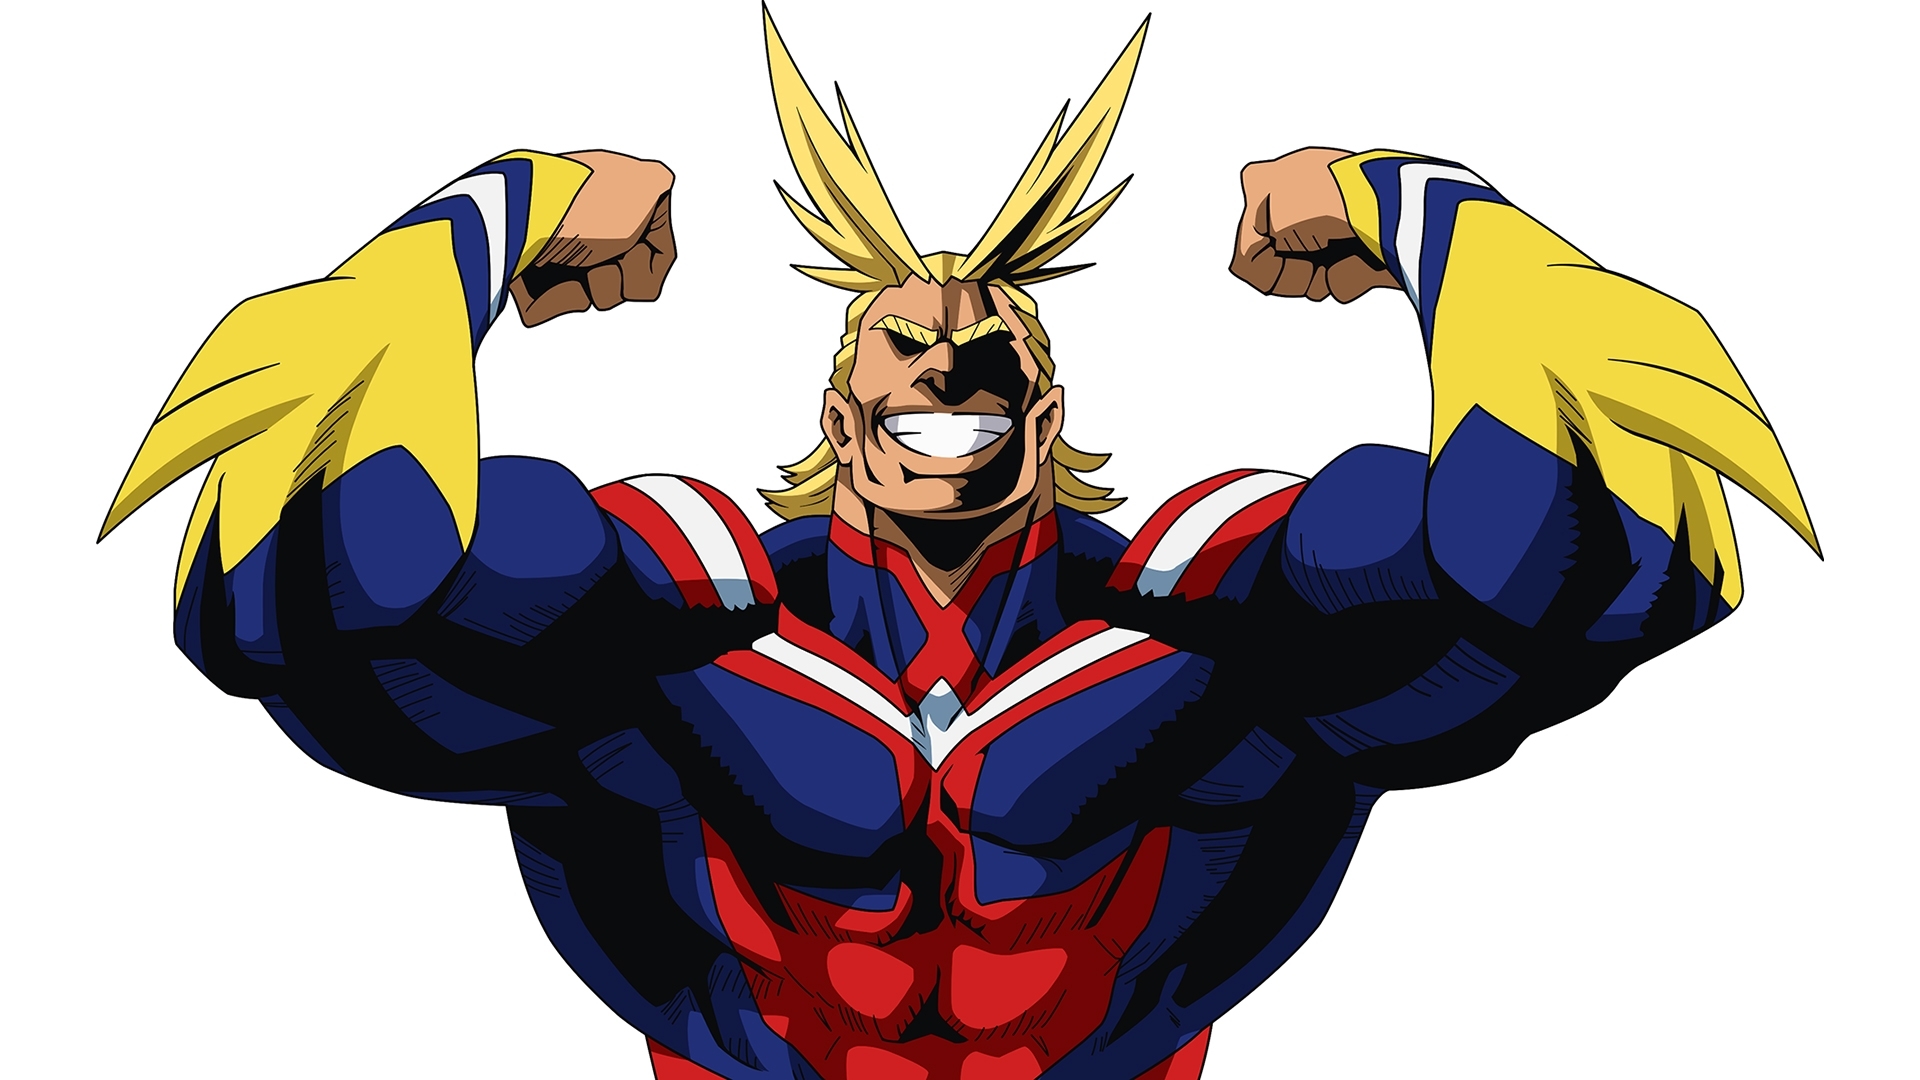 10 New All Might My Hero Academia Wallpaper FULL HD 1920×1080 For PC Background